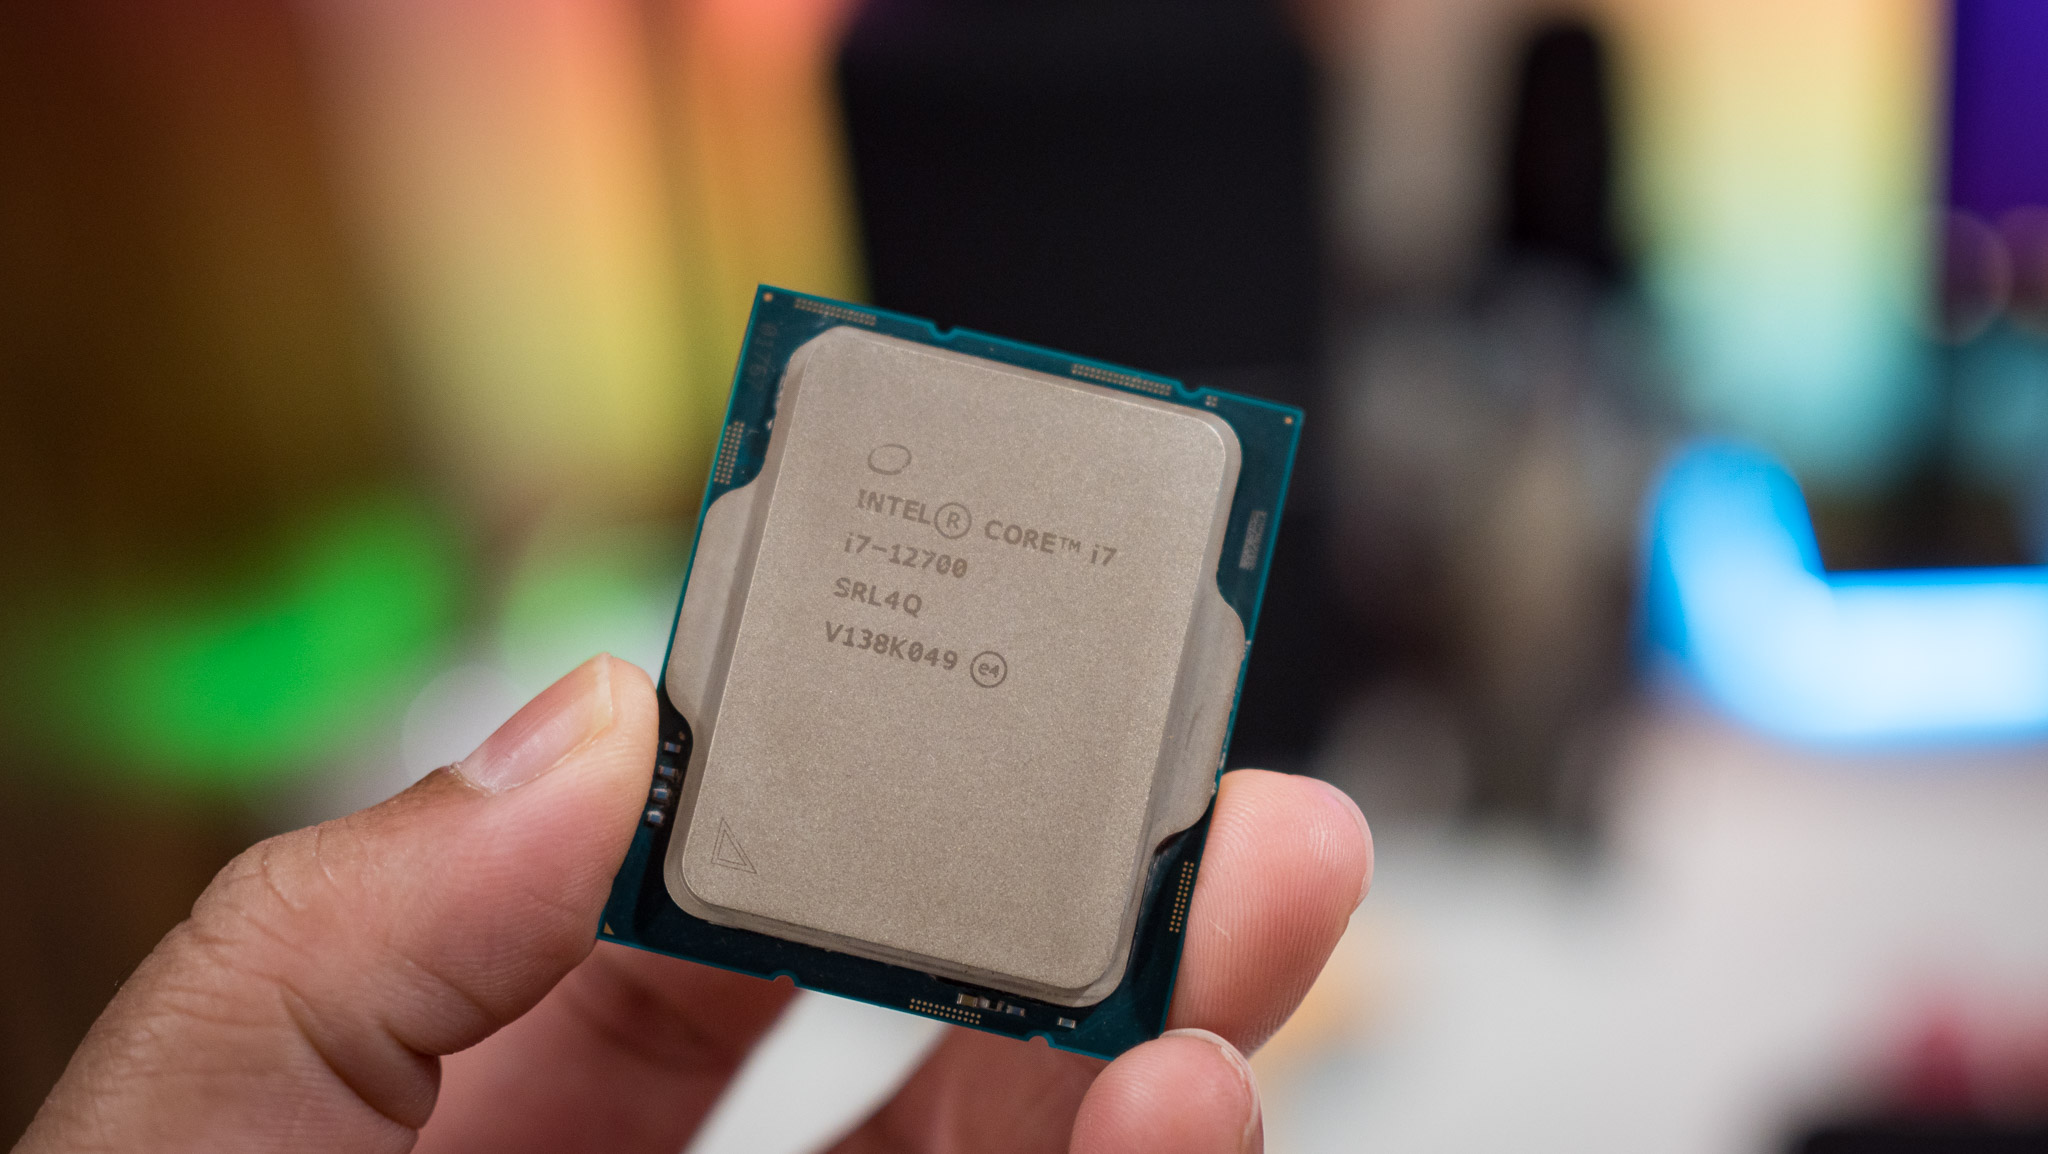 Intel's Core i7-12700 continues to be an excellent choice for